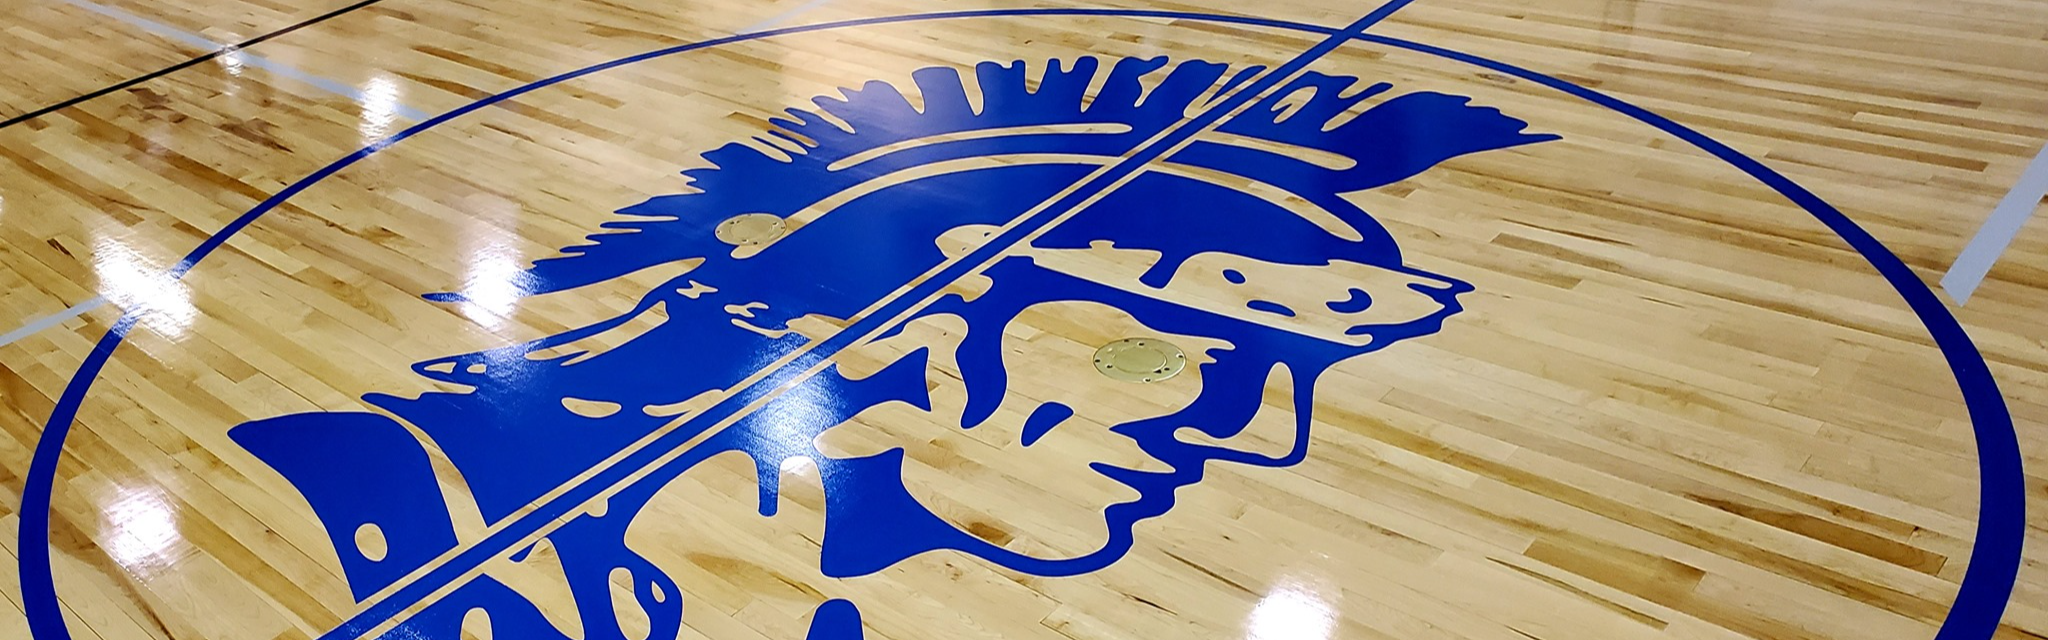 A picture of the gym floor with the Trojan logo in blue